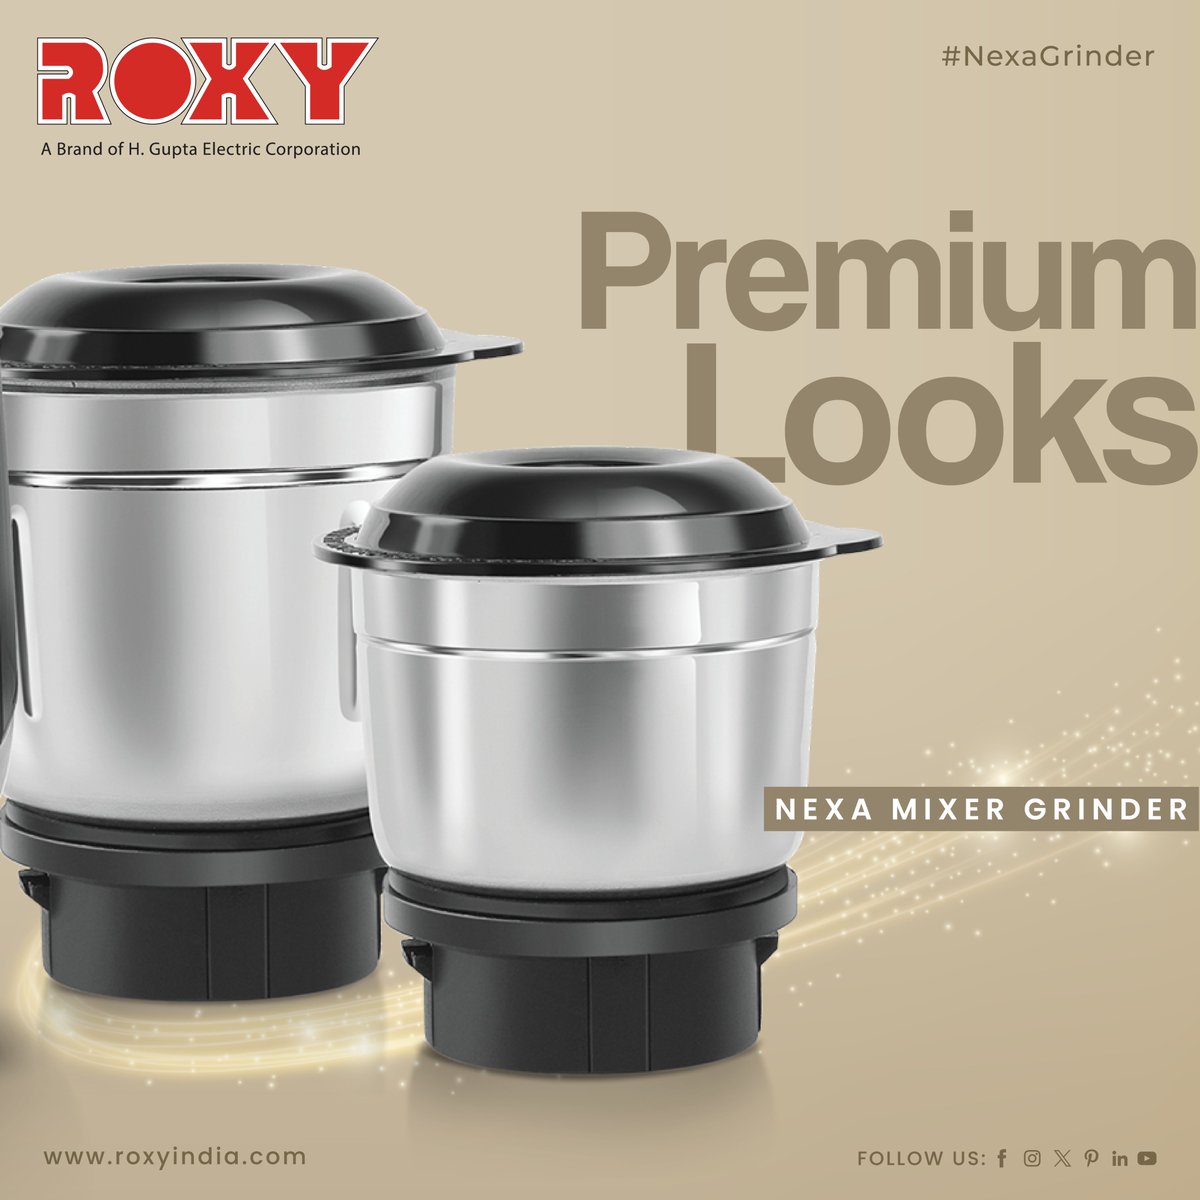 Upgrade your kitchen arsenal with the Roxy NEXA Mixer Grinder!